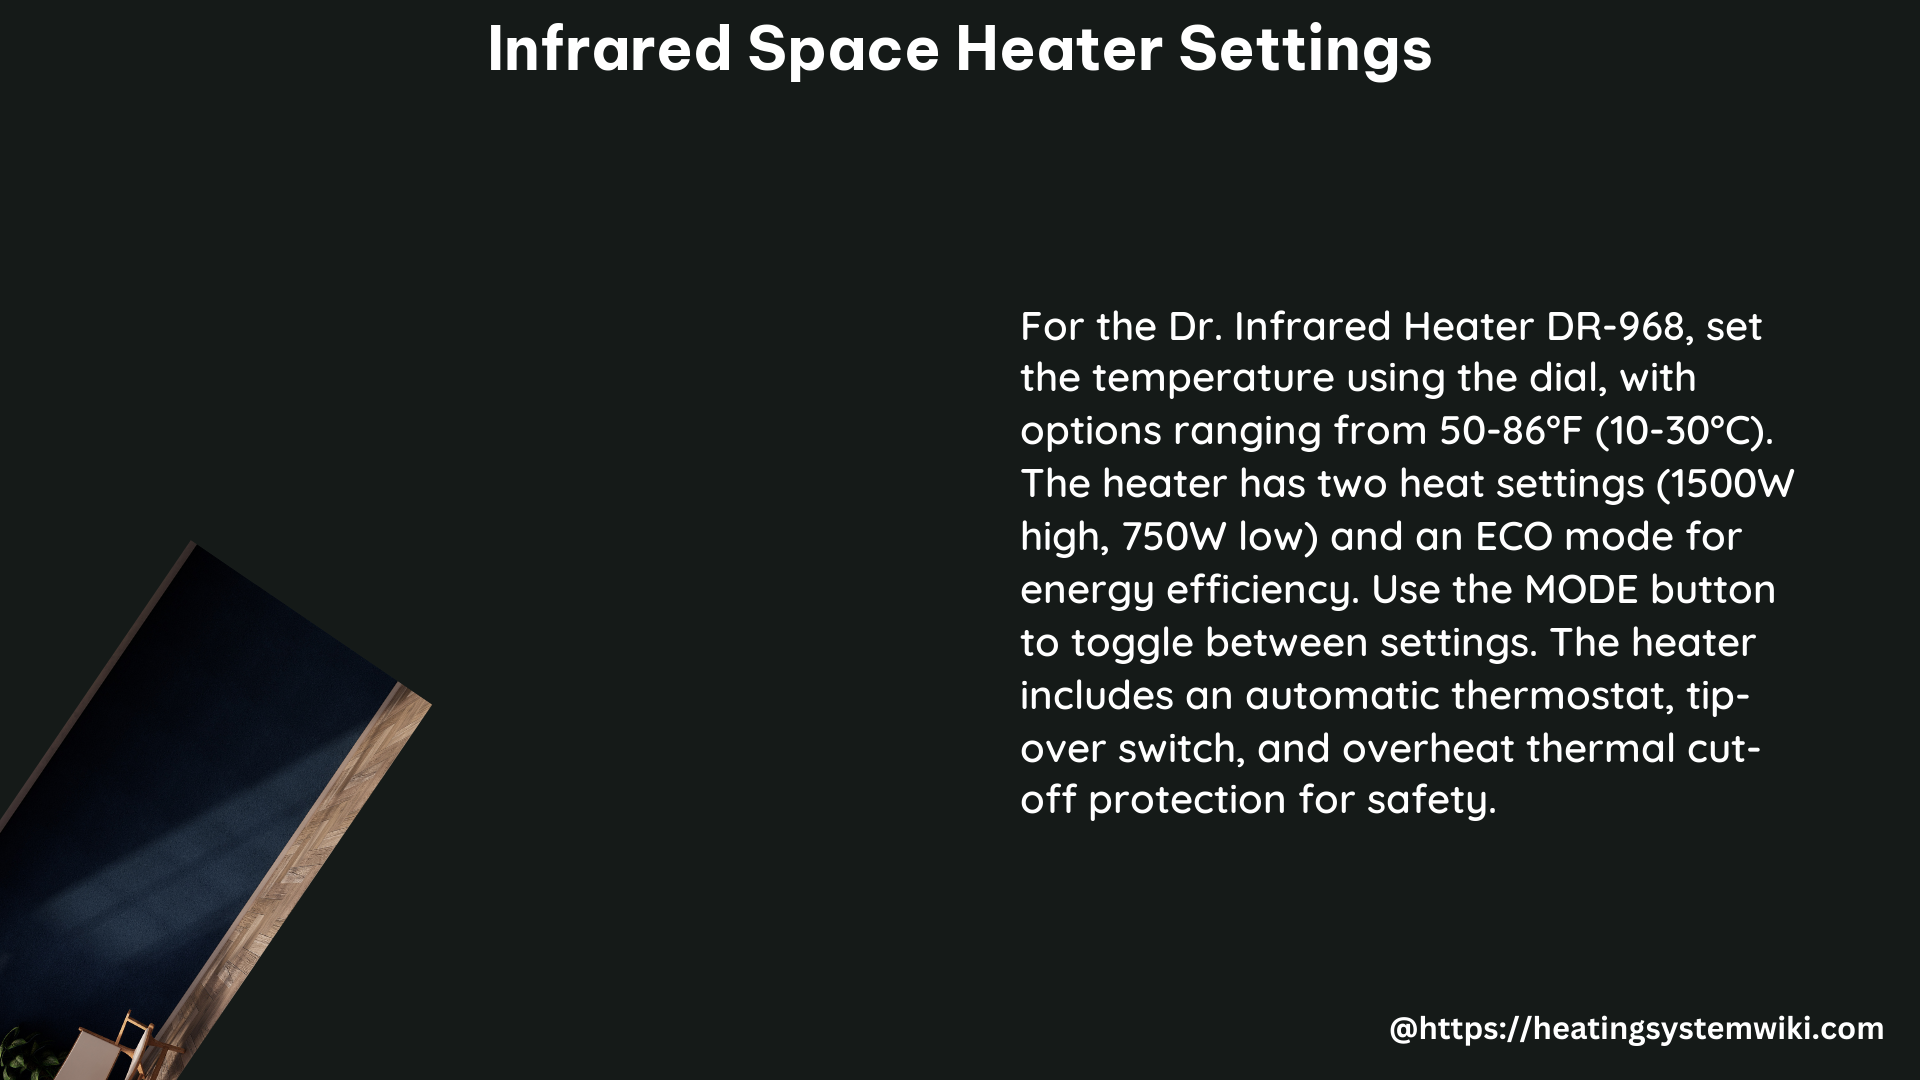 Infrared Space Heater Settings